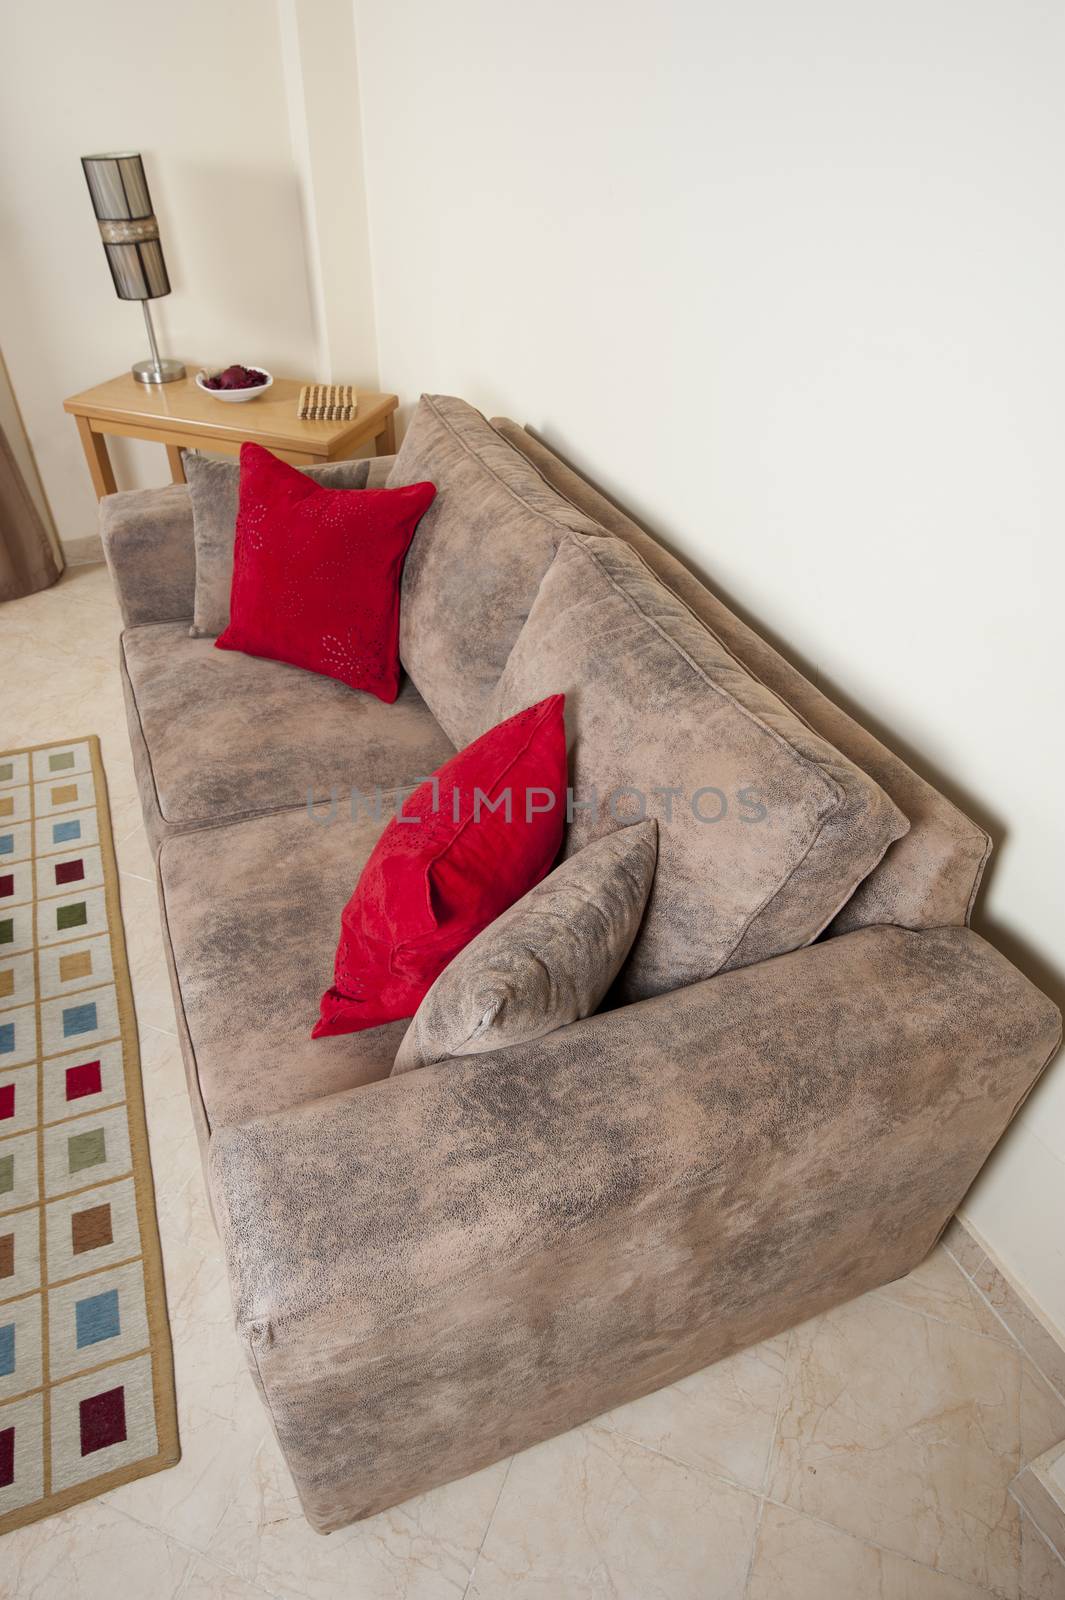 Large comfortable sofa chair in a living room interior decor image